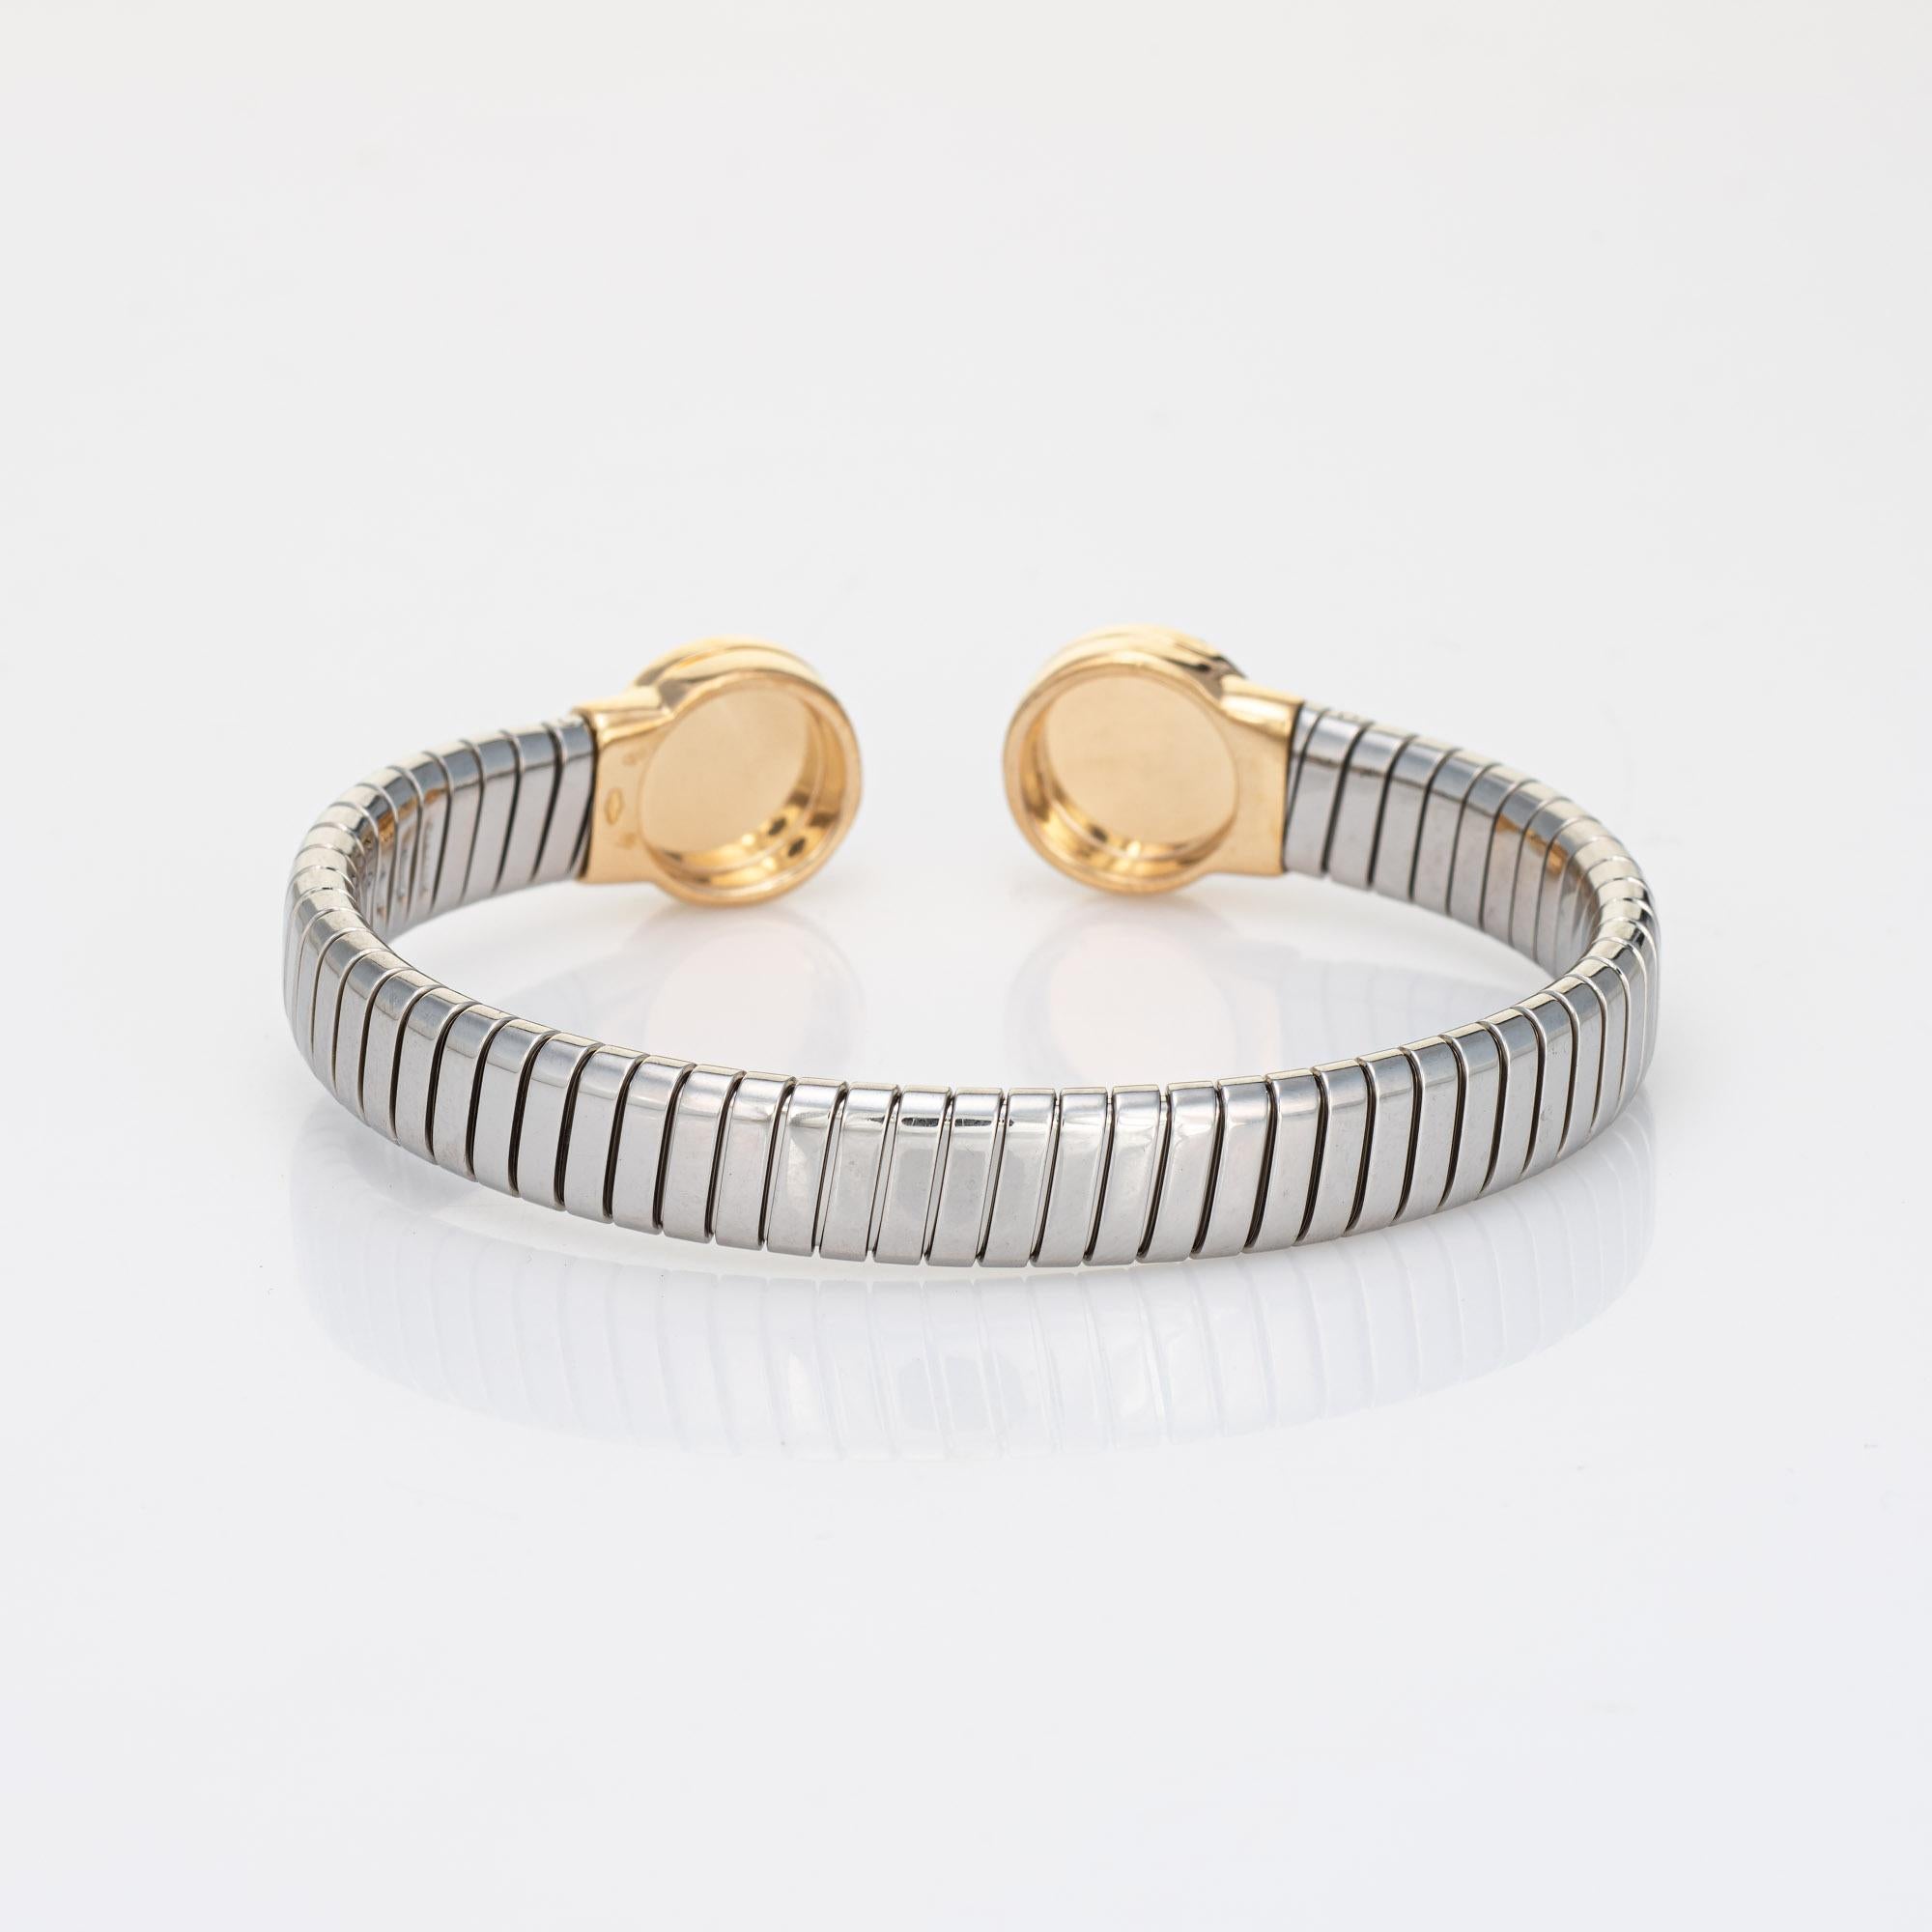 Stylish vintage Bulgari 'Tubogas' bracelet crafted in 18k yellow gold and stainless steel (circa 1990s).  

The bracelet is designed to resemble a flexible gas pipe, finished with onyx set 18k gold ends. The Tubogas design requires a great amount of